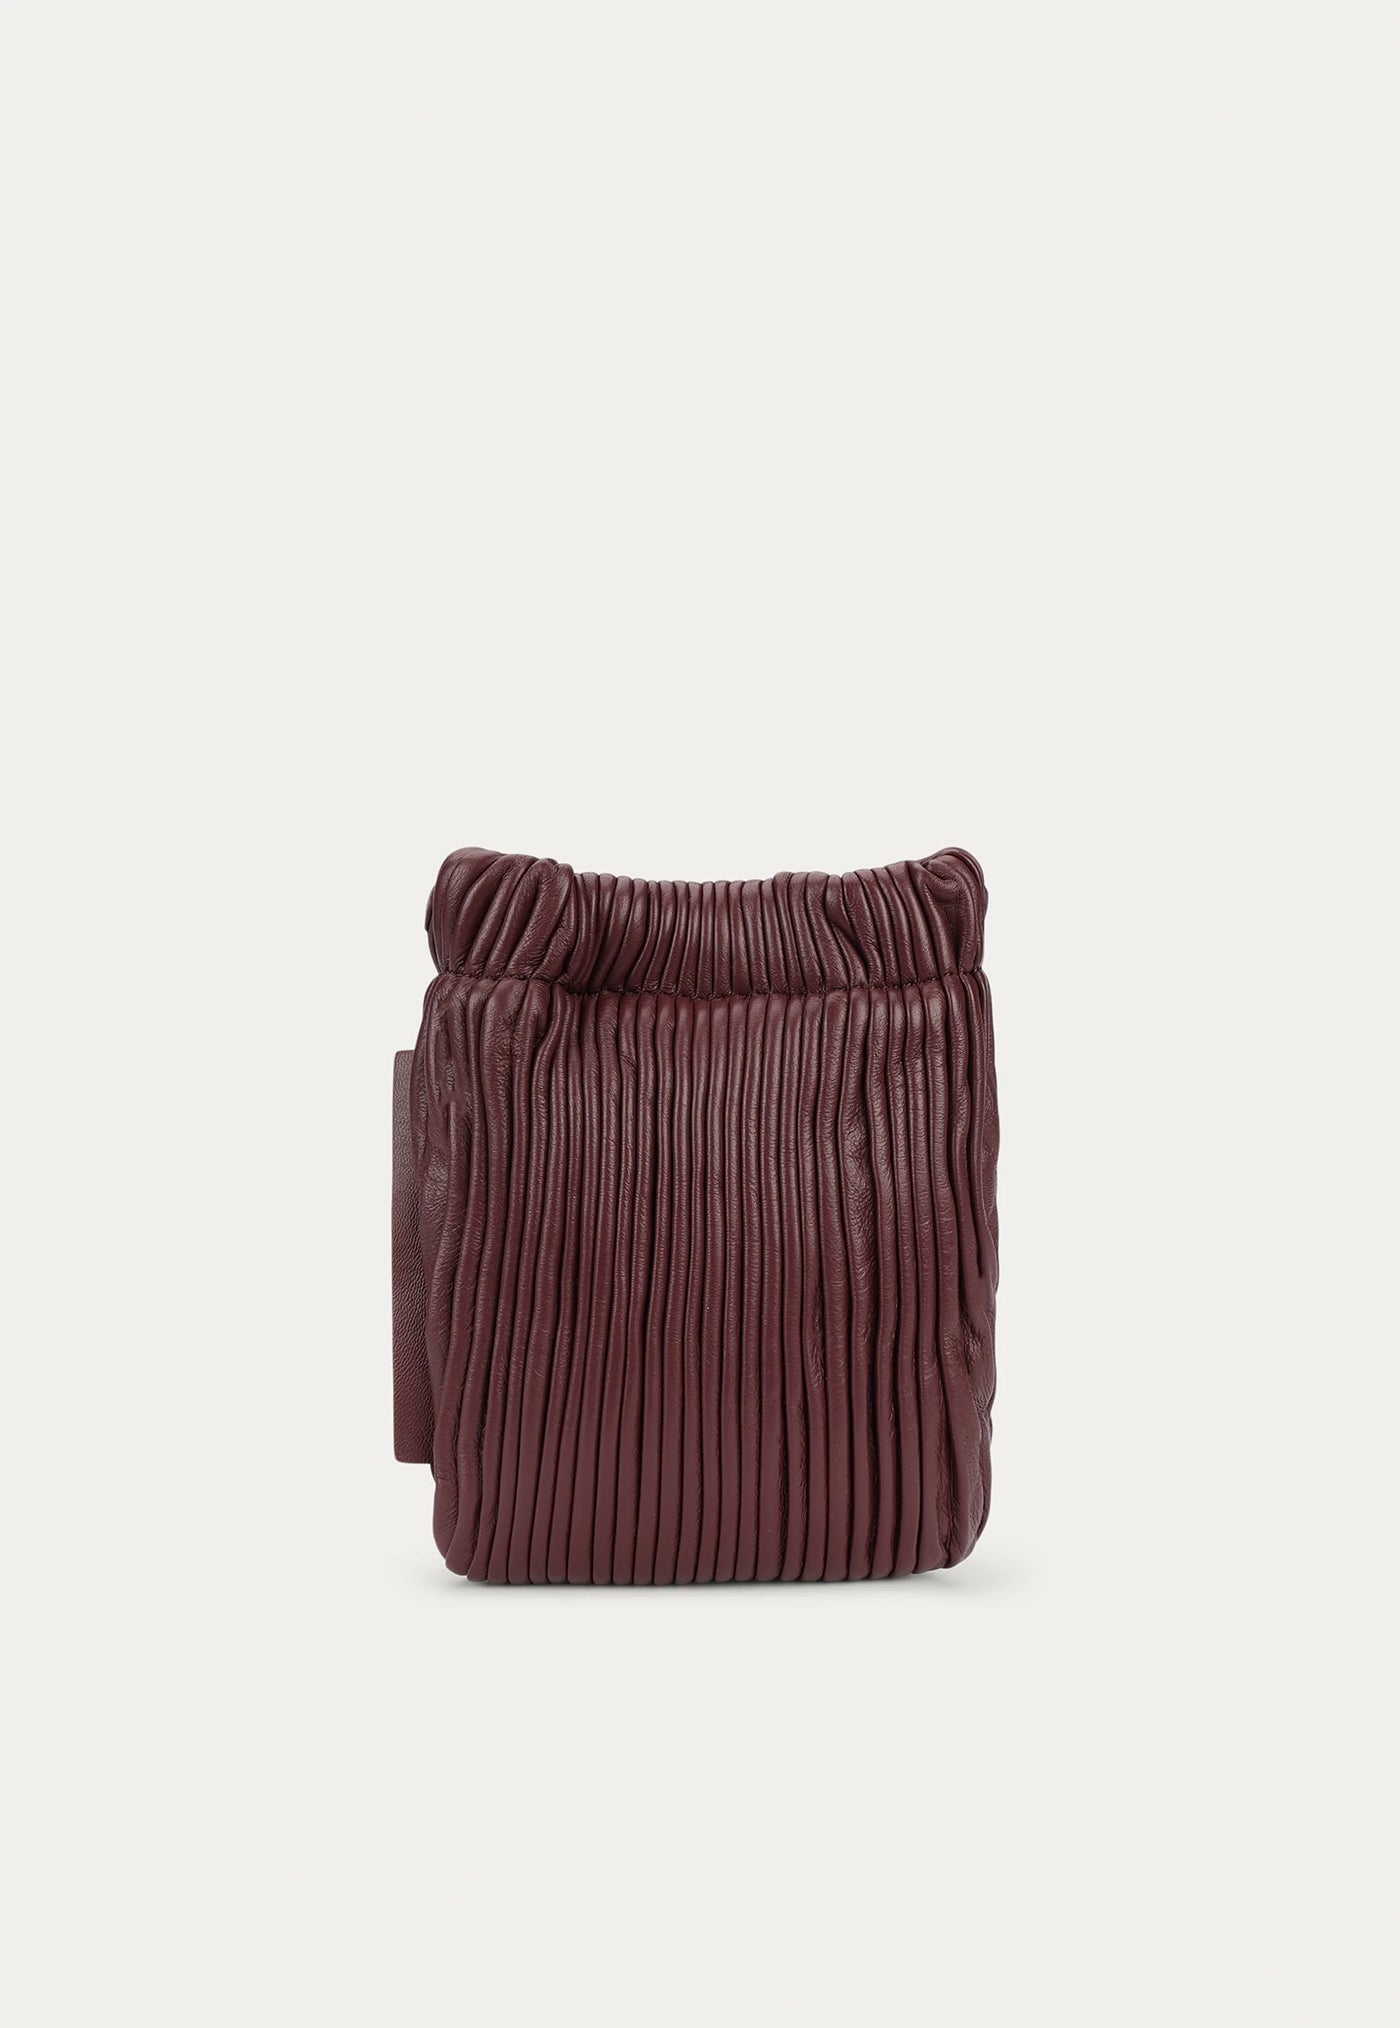 Mr Cinch Pouch - Claret Pleated sold by Angel Divine